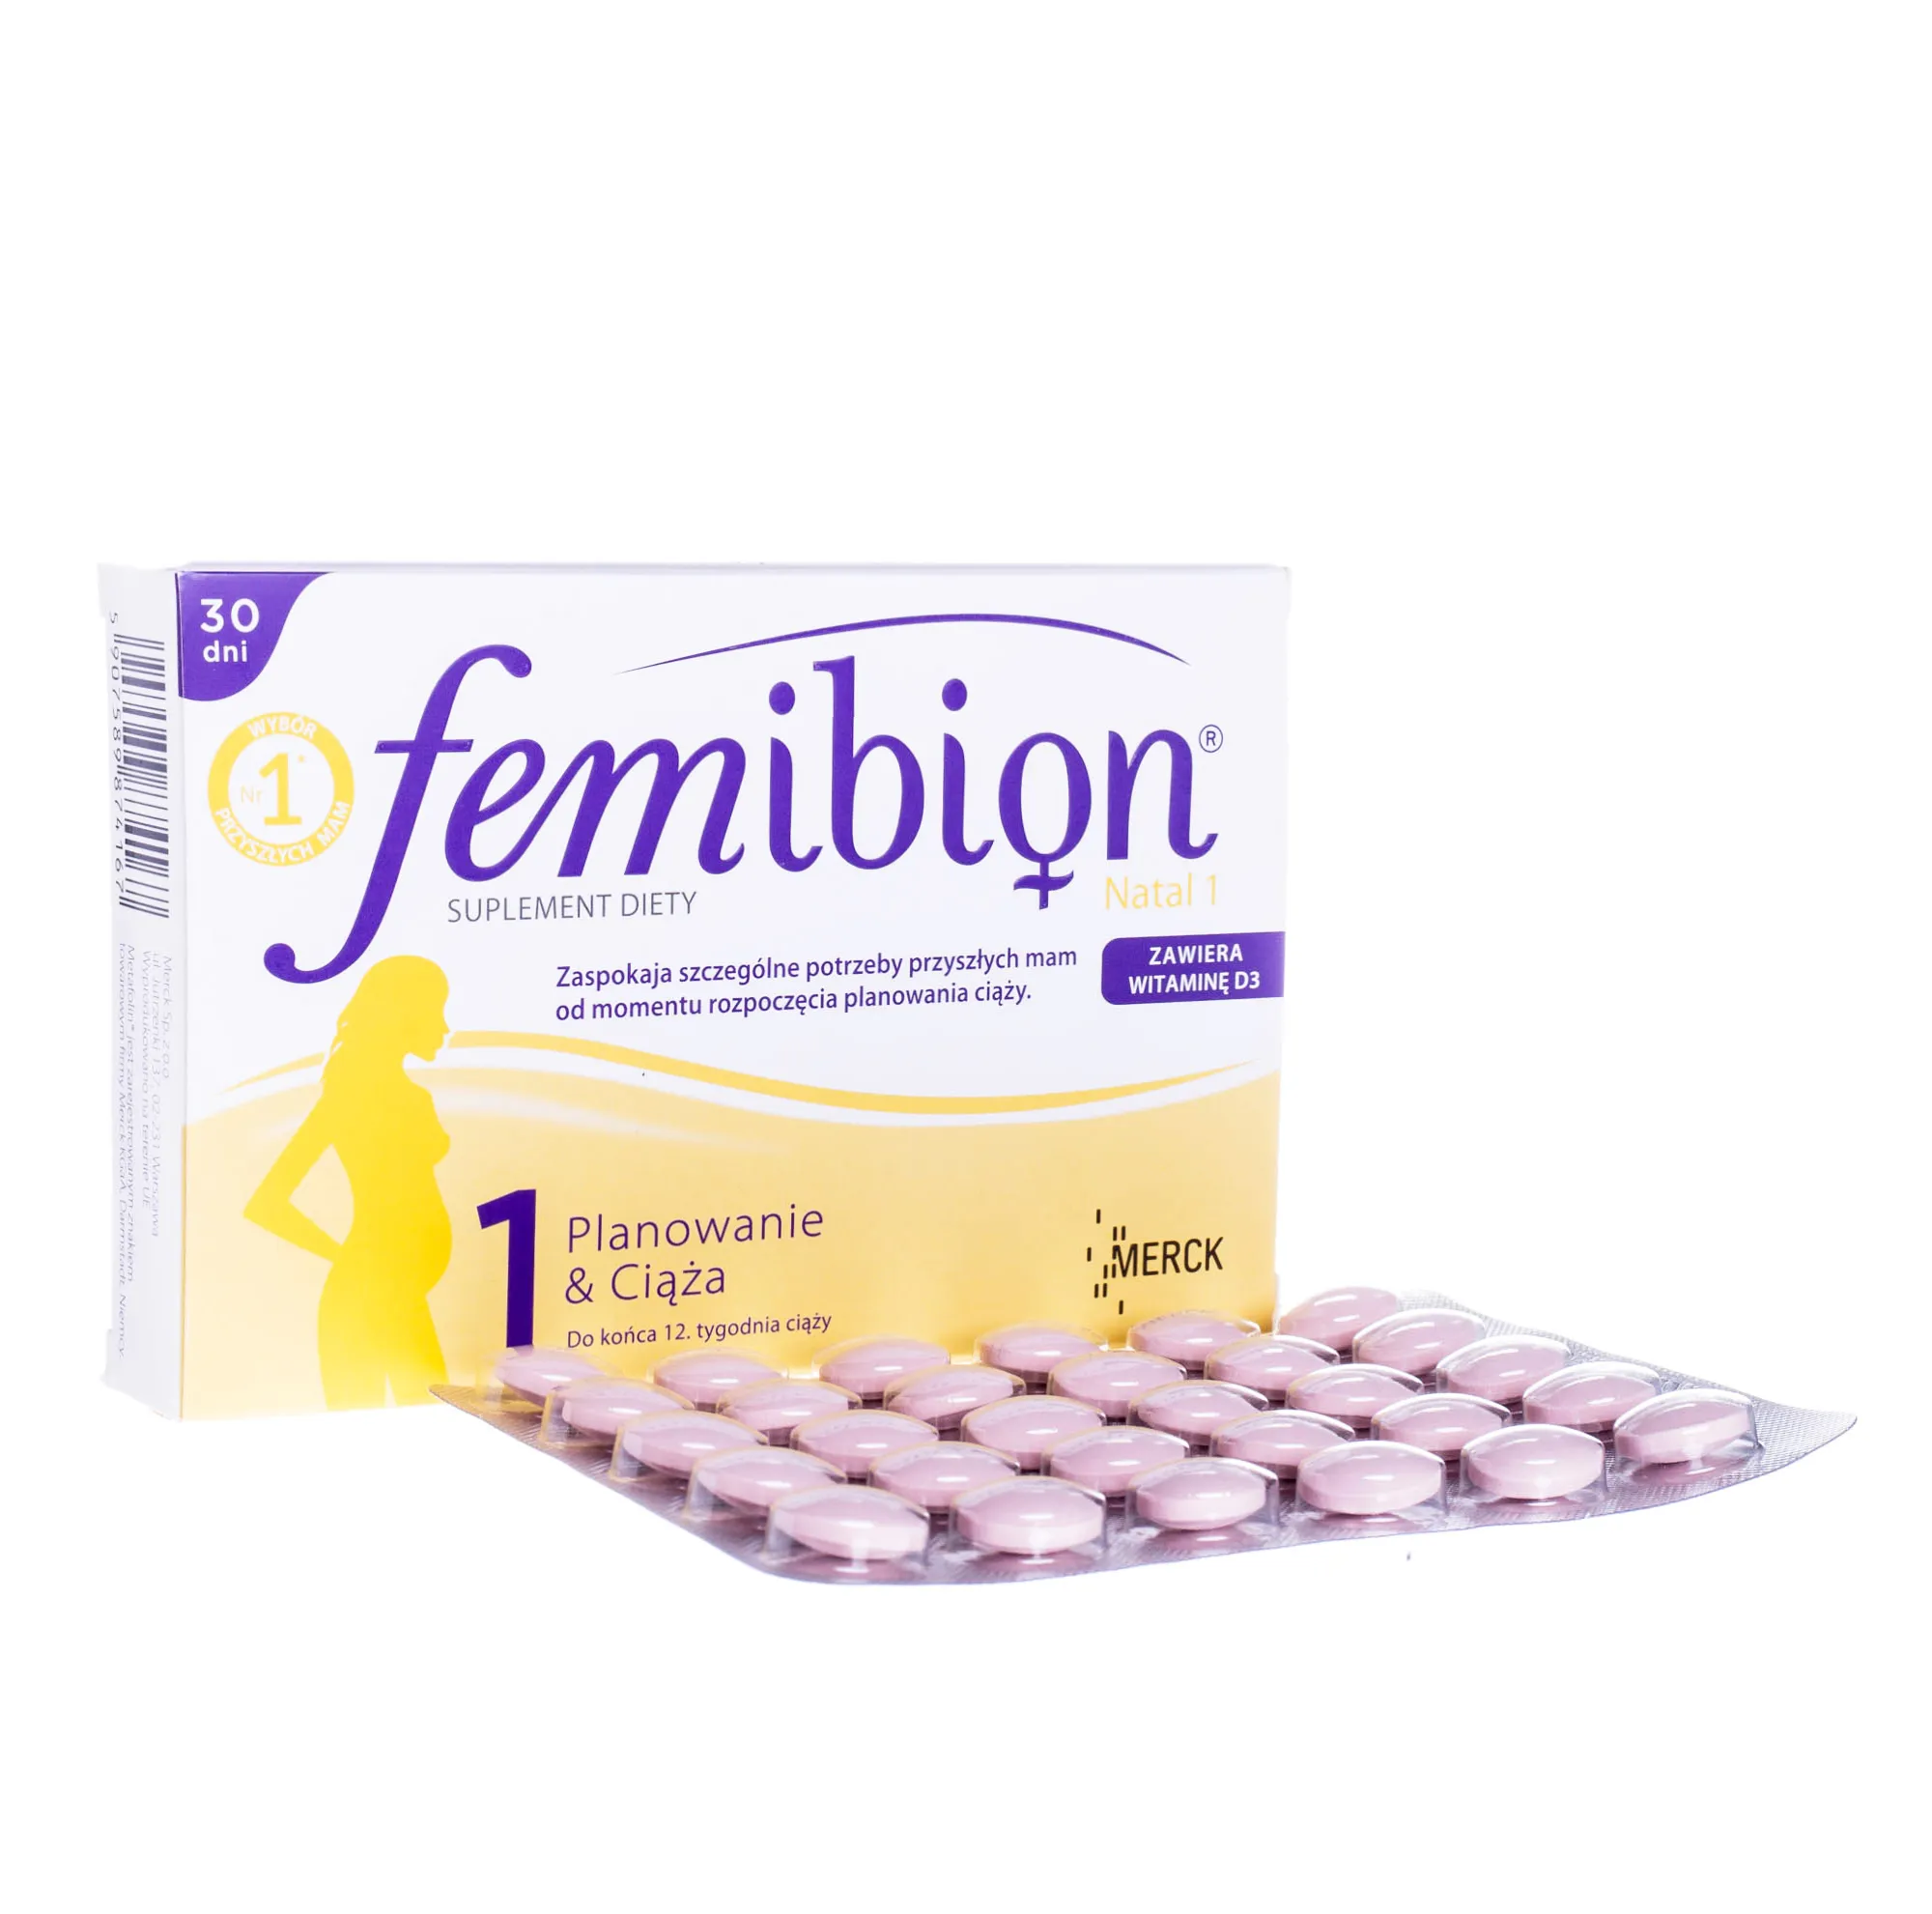 Femibion Natal 1 suplement diety, 30 dni